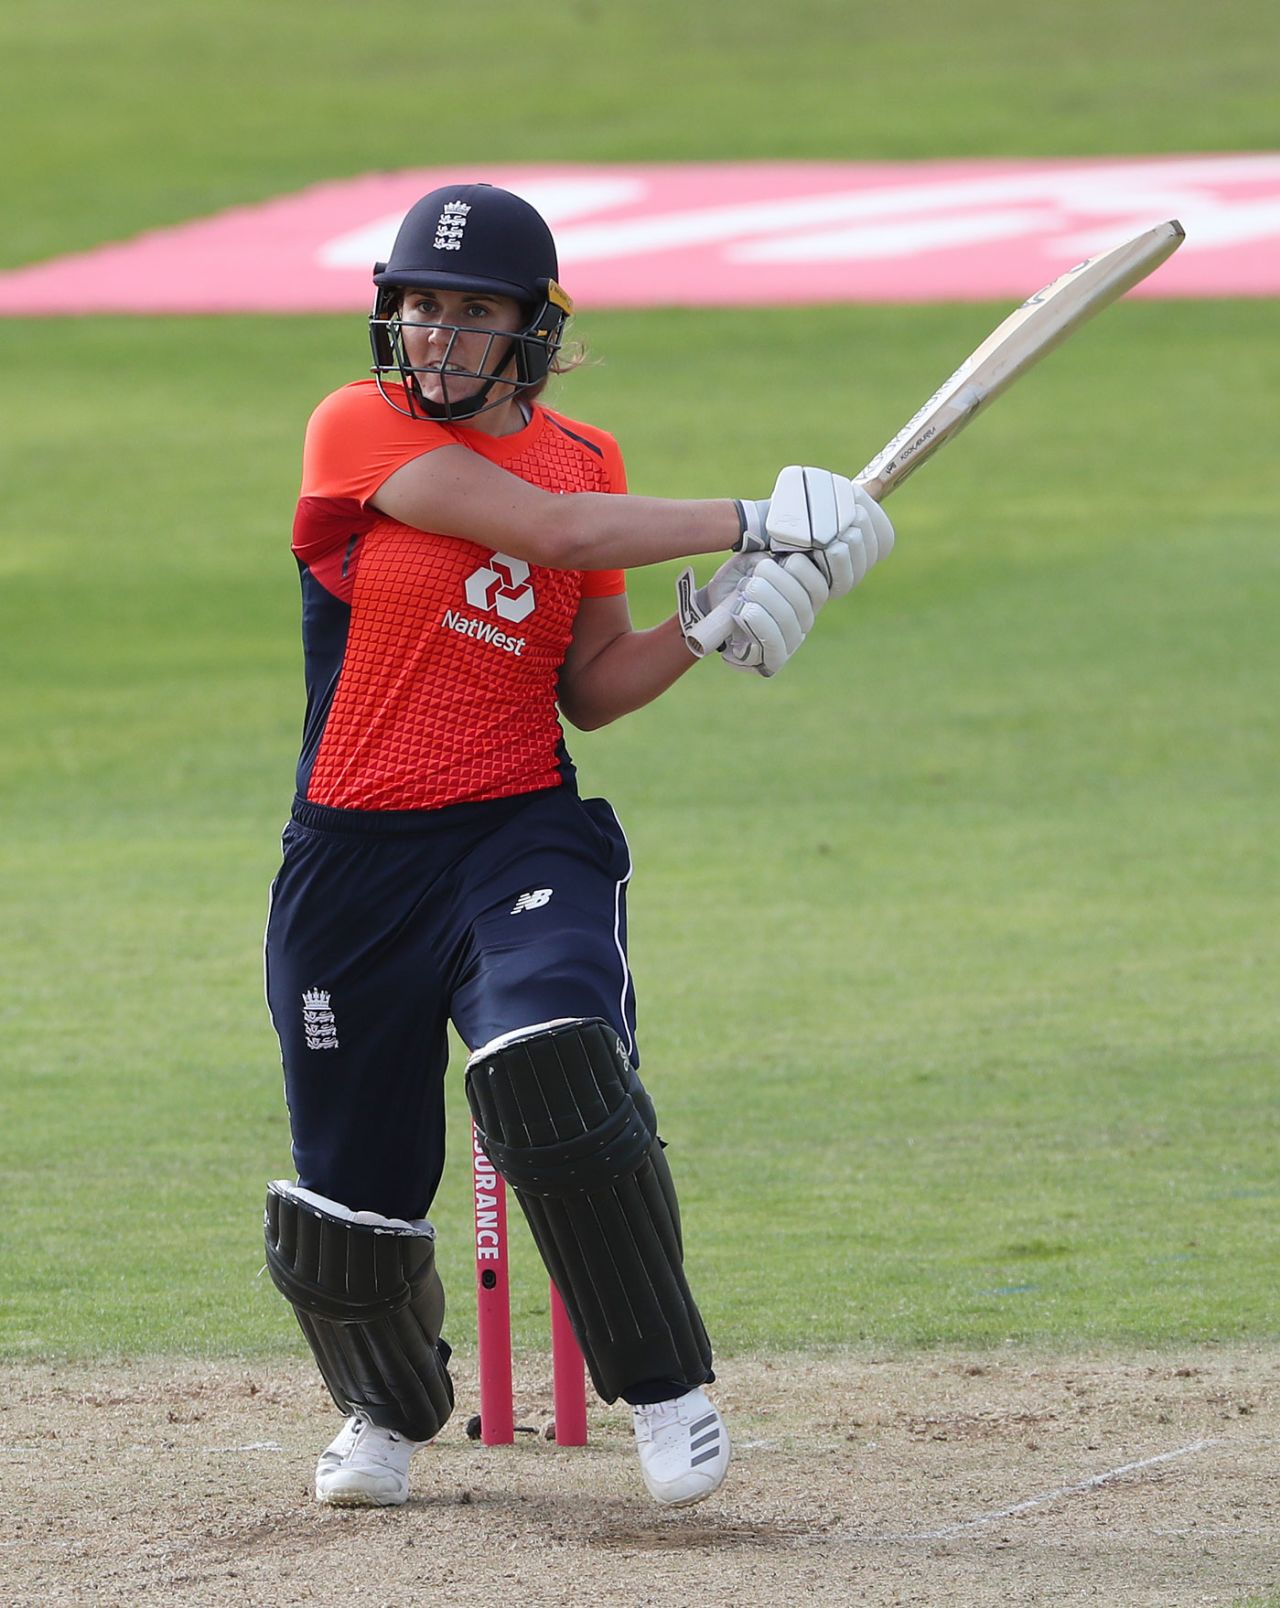 Nat Sciver muscles a shot during her half-century, England v New Zealand, women's T20 tri-series, Taunton, June 23, 2018